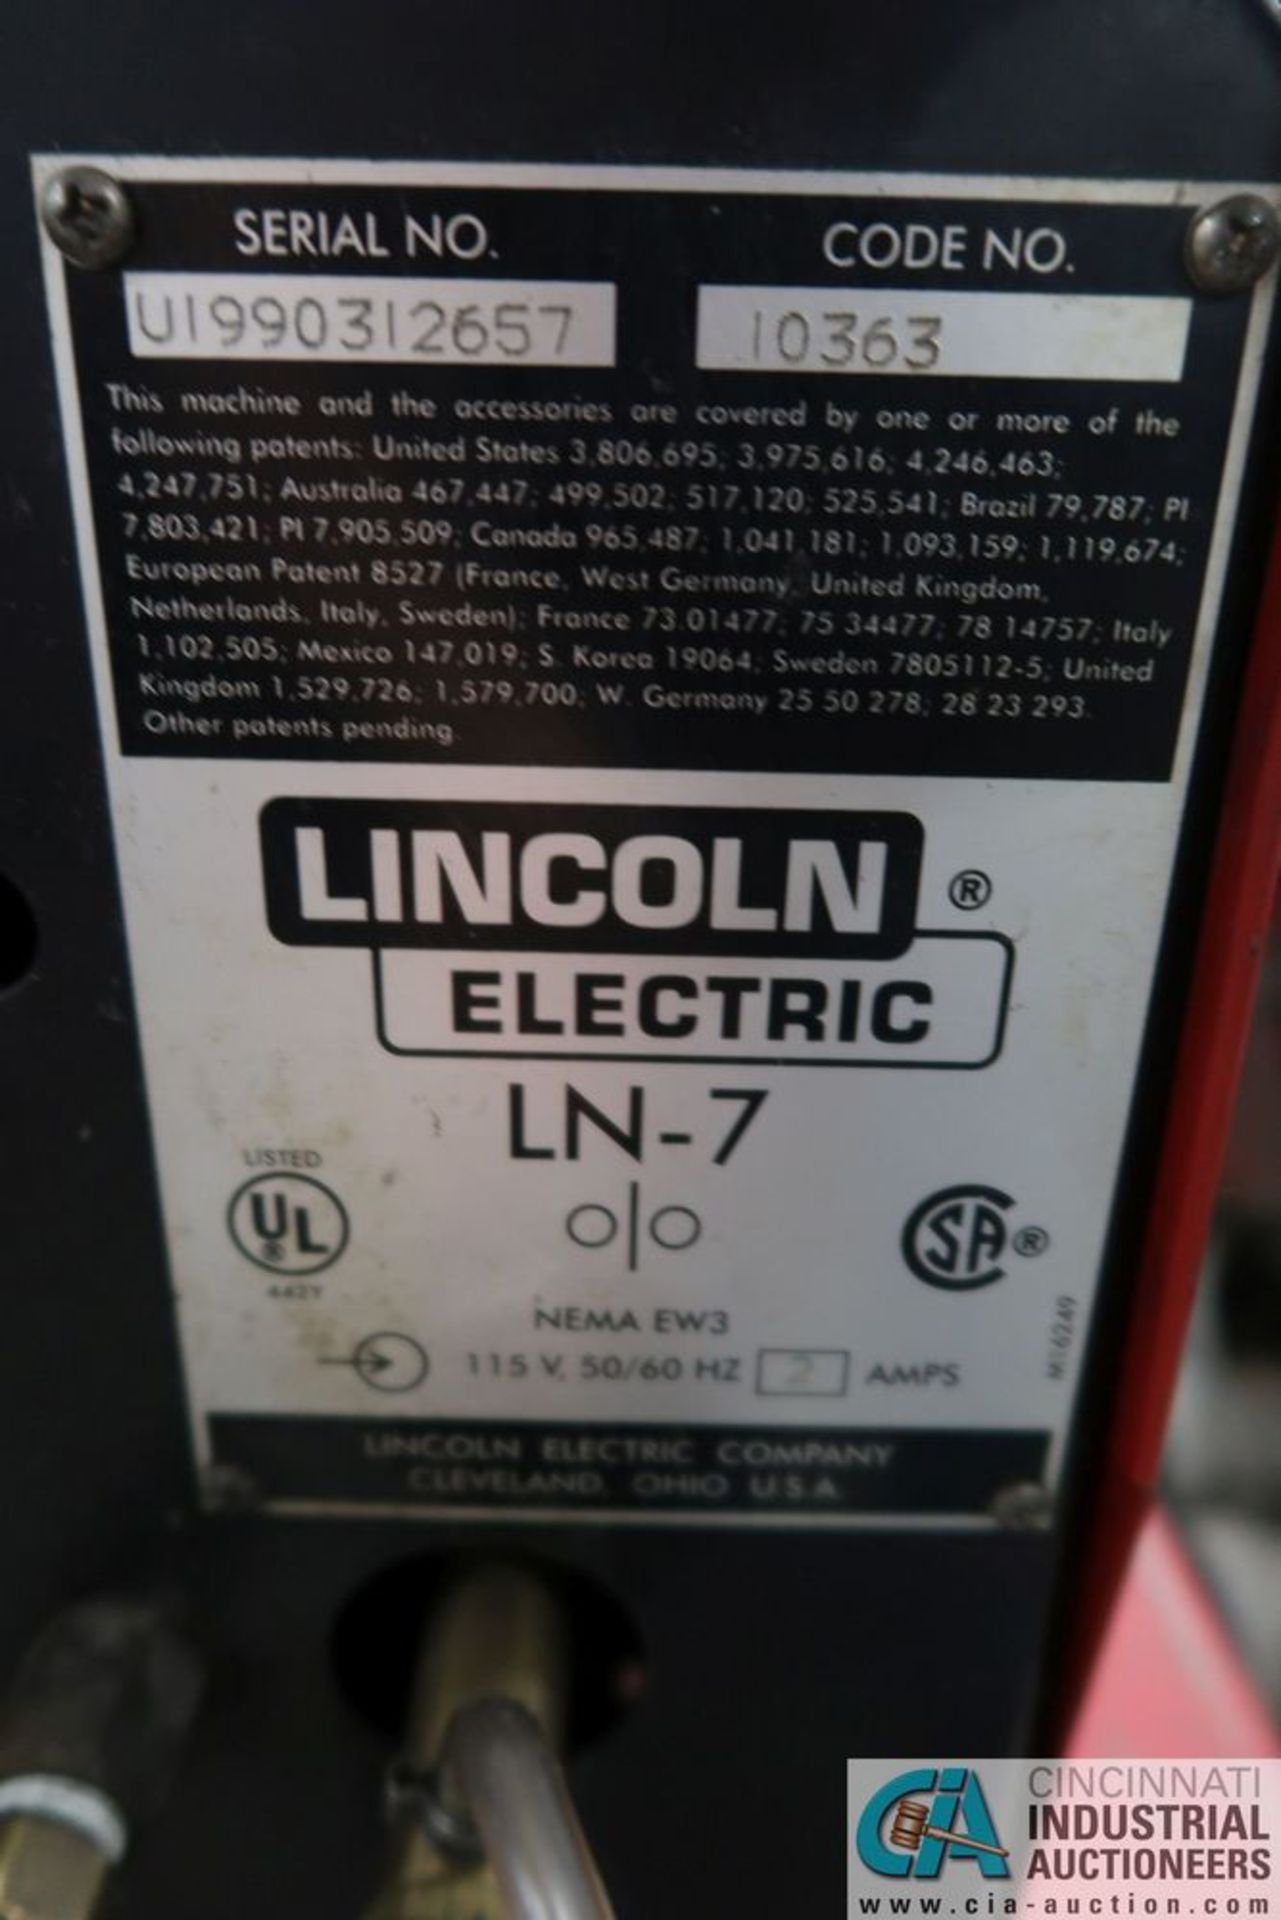 300 AMP LINCOLN CV-300 WELDER; S/N U1980308092, WITH LINCOLN LN-7 WIRE FEED - Image 7 of 7